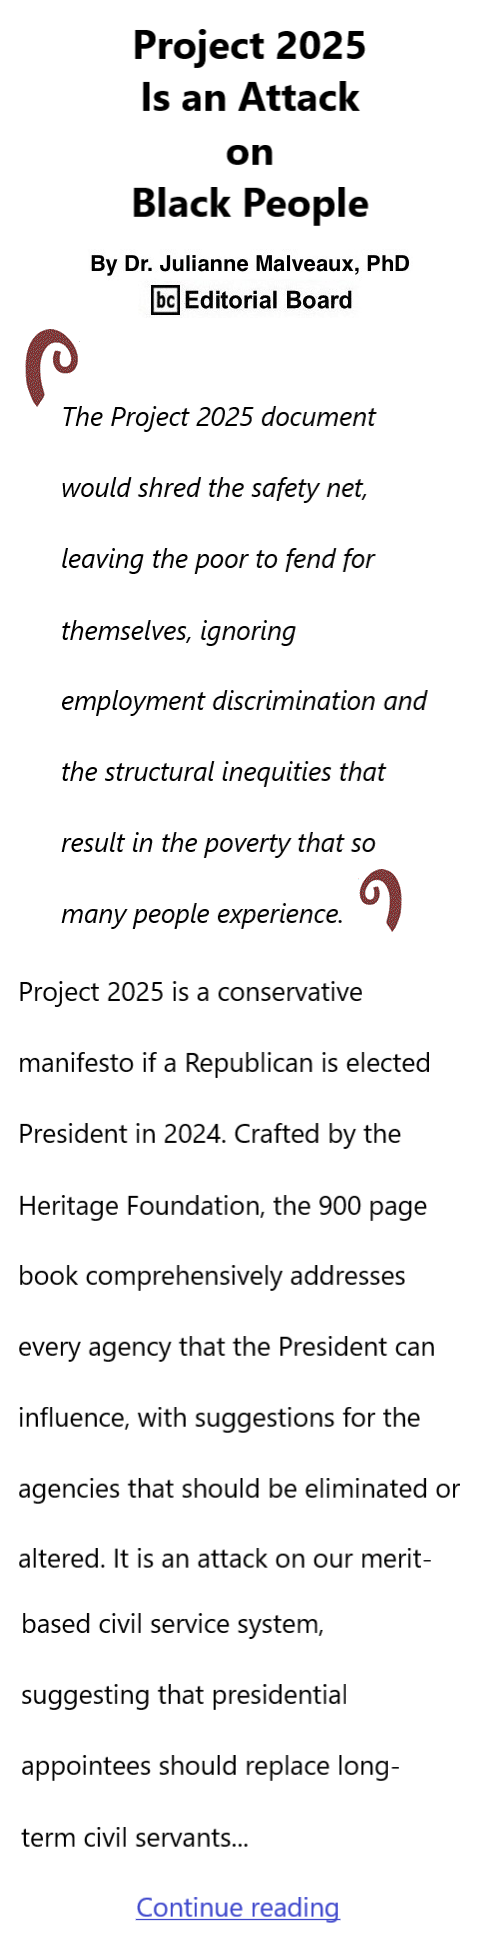 BlackCommentator.com June 20, 2024 - Issue 1005: Project 2025 Is an Attack on Black People By Dr. Julianne Malveaux, PhD, BC Editorial Board